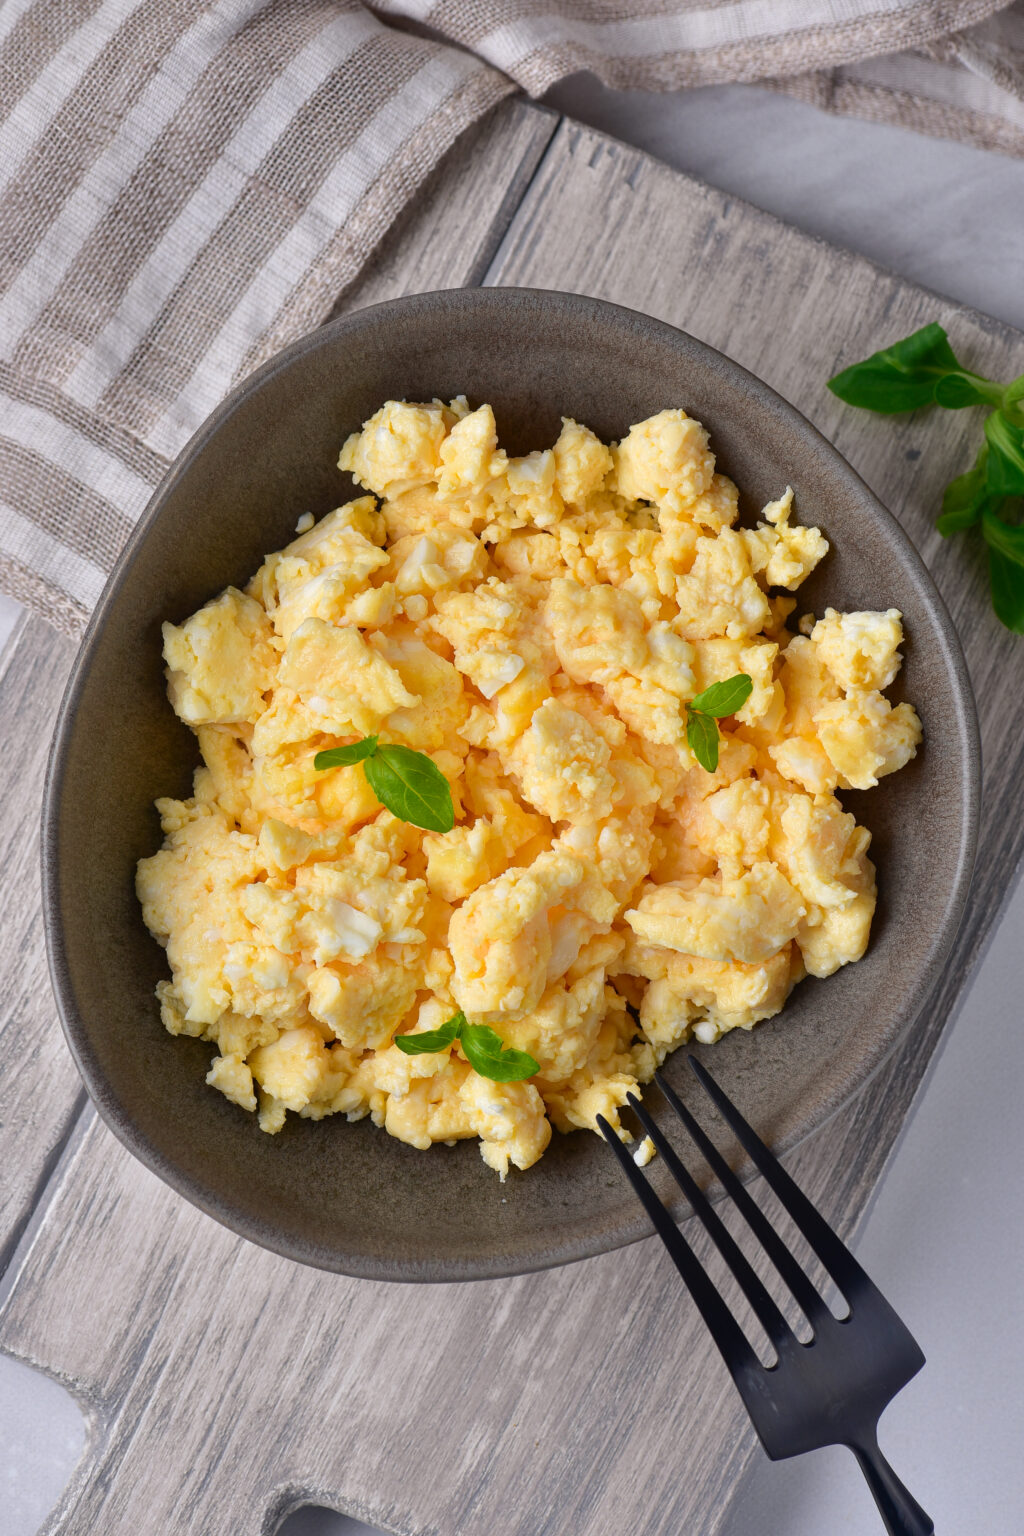 microwave scrambled eggs in a grey bowl